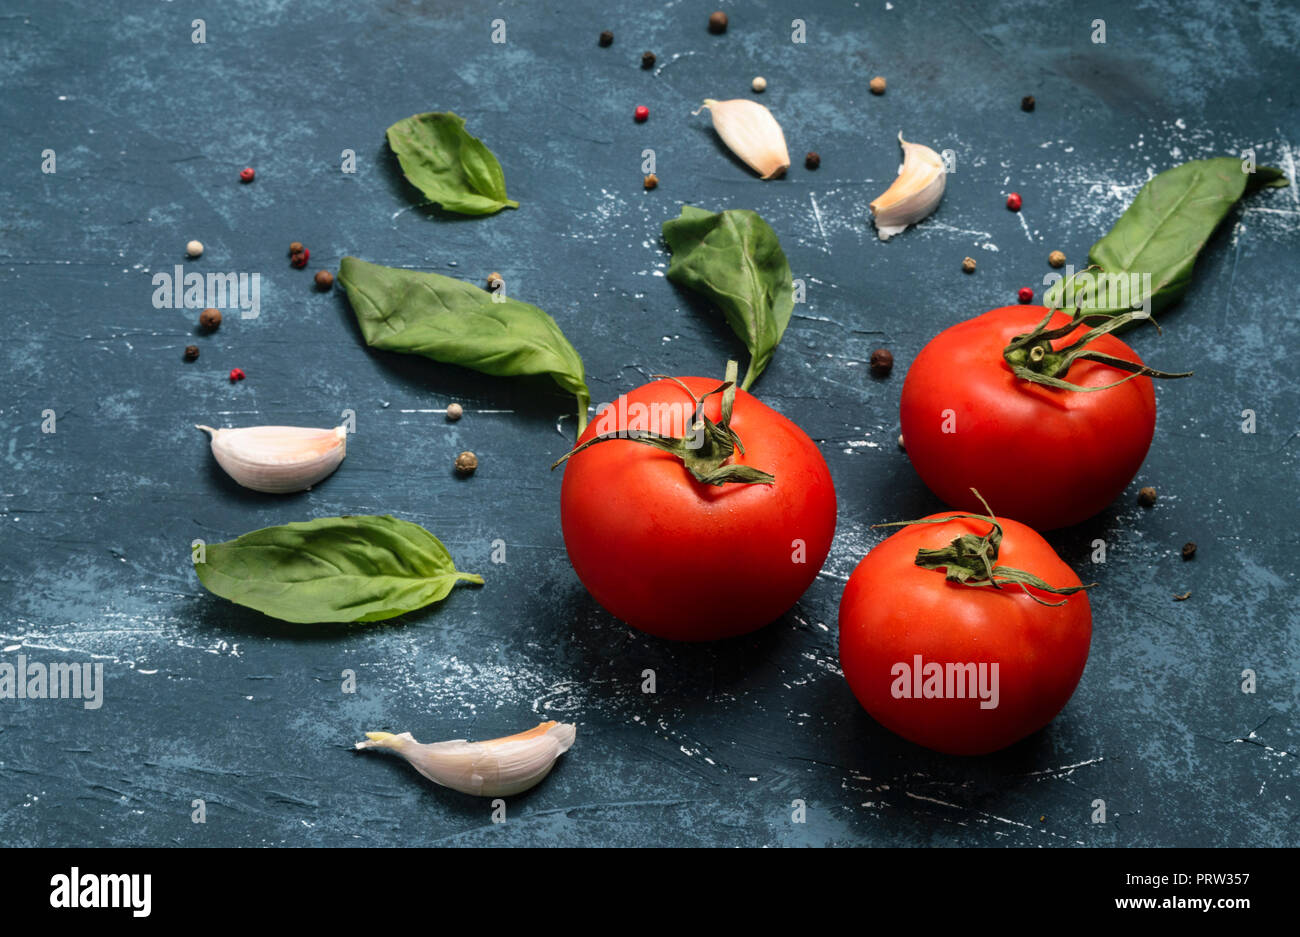 Cooking  ingredients - basil leaves, garlic cloves, pepper and tomatoes. Concrete grunge background. Stock Photo